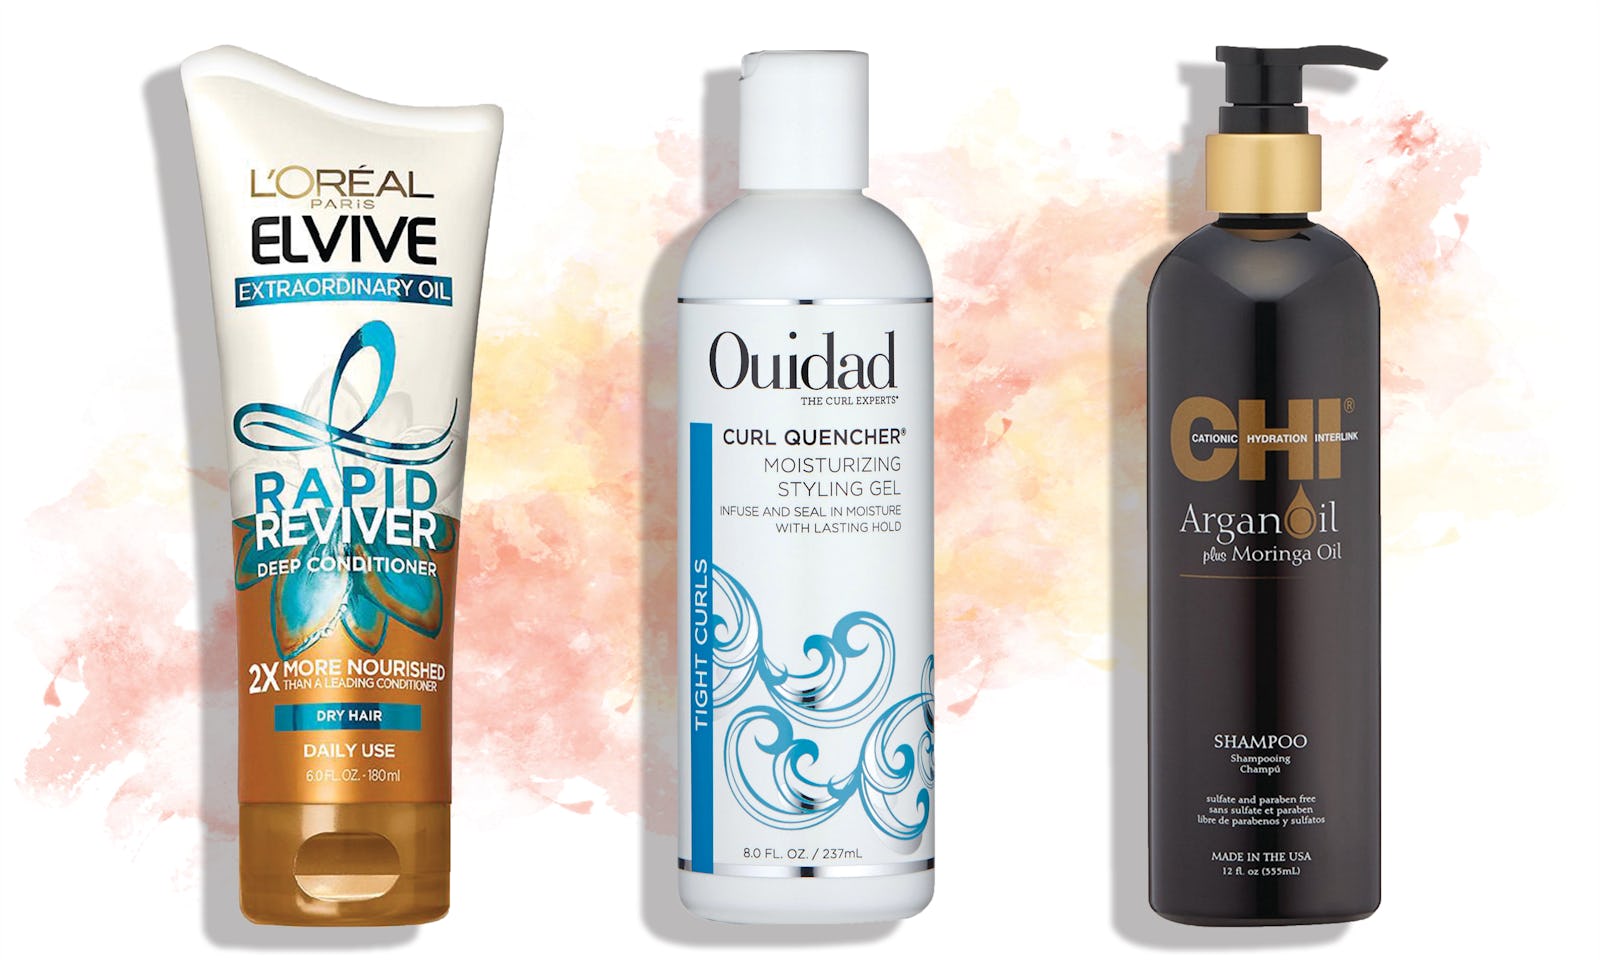 8. "The Best Shampoos and Conditioners for Greyish Blue Hair" - wide 2